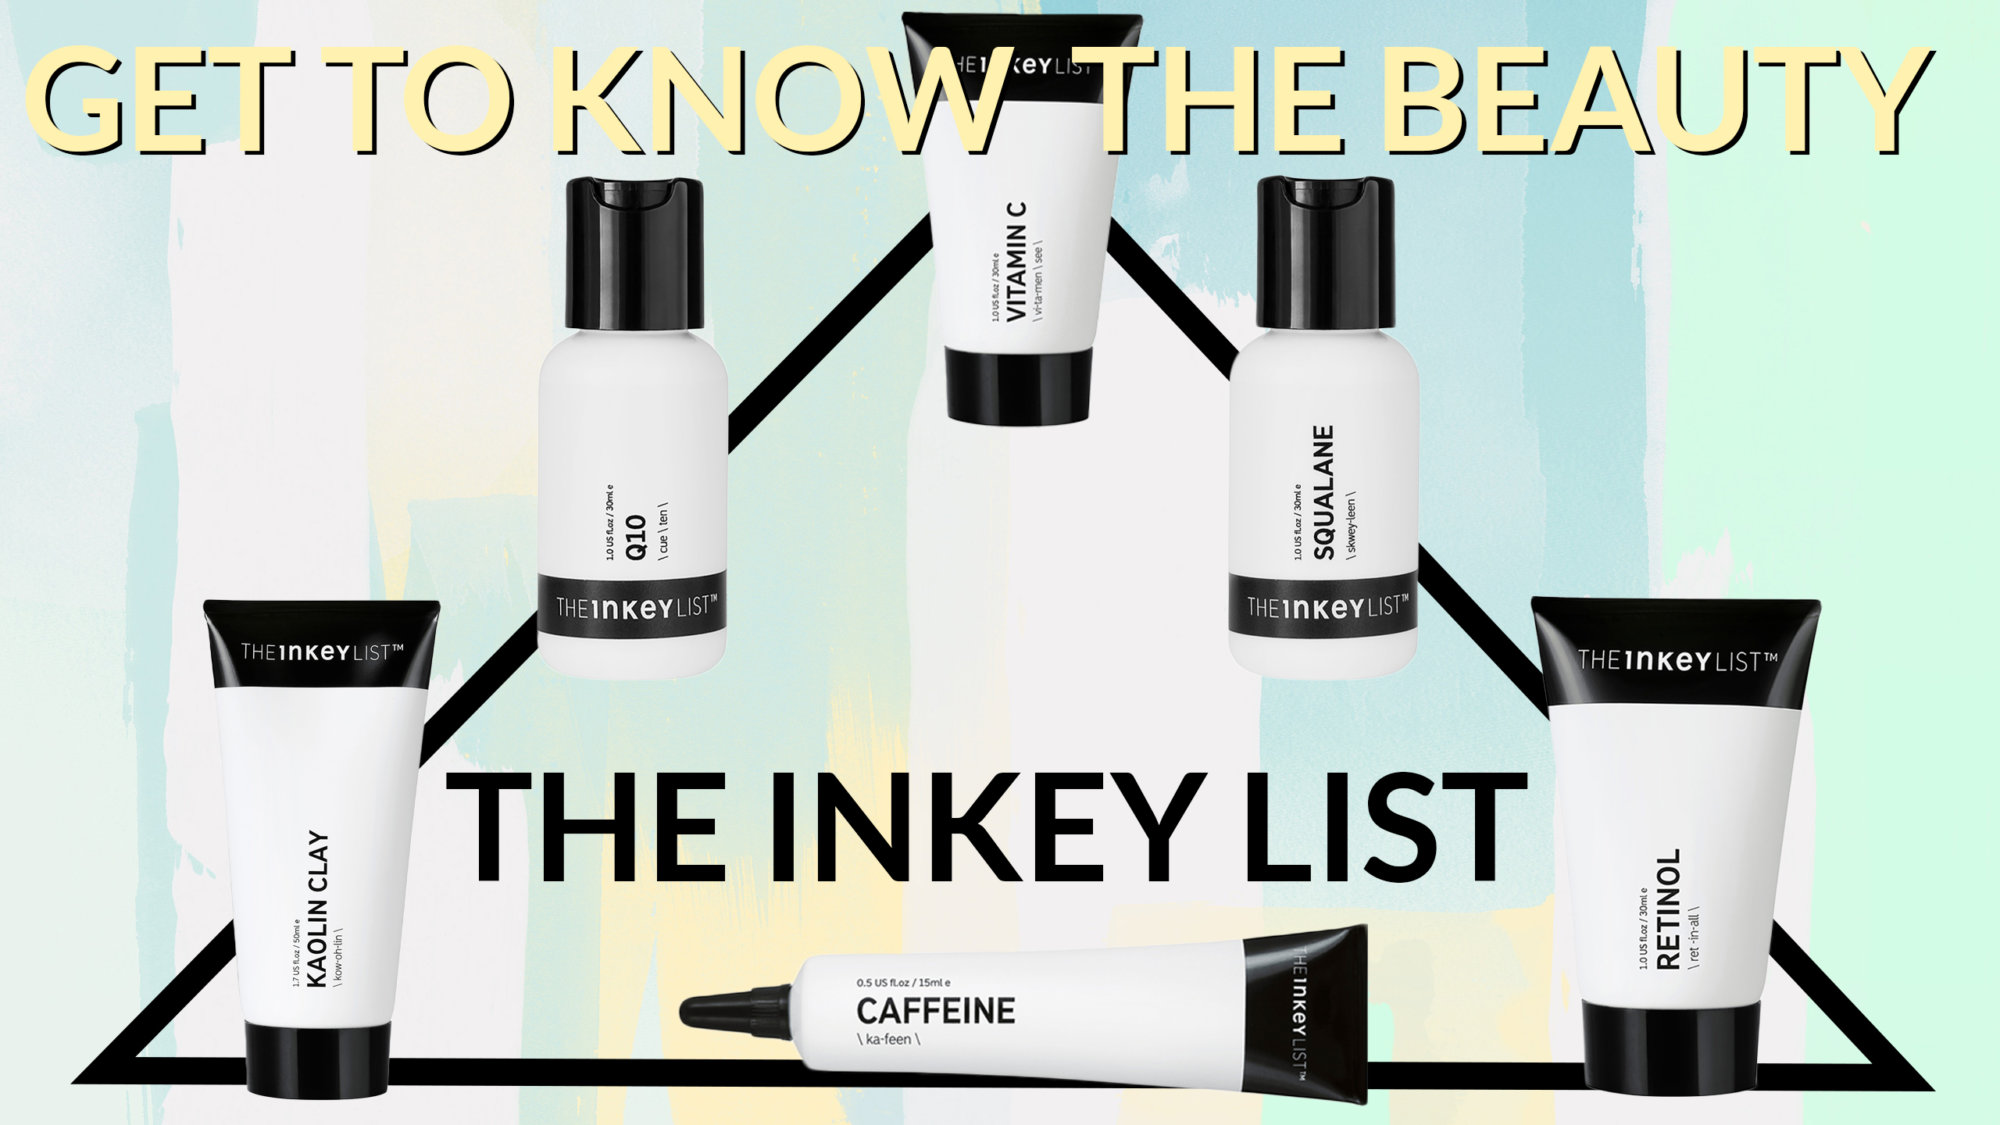 The Italian Reve Get To Know The Beauty The Inkey List